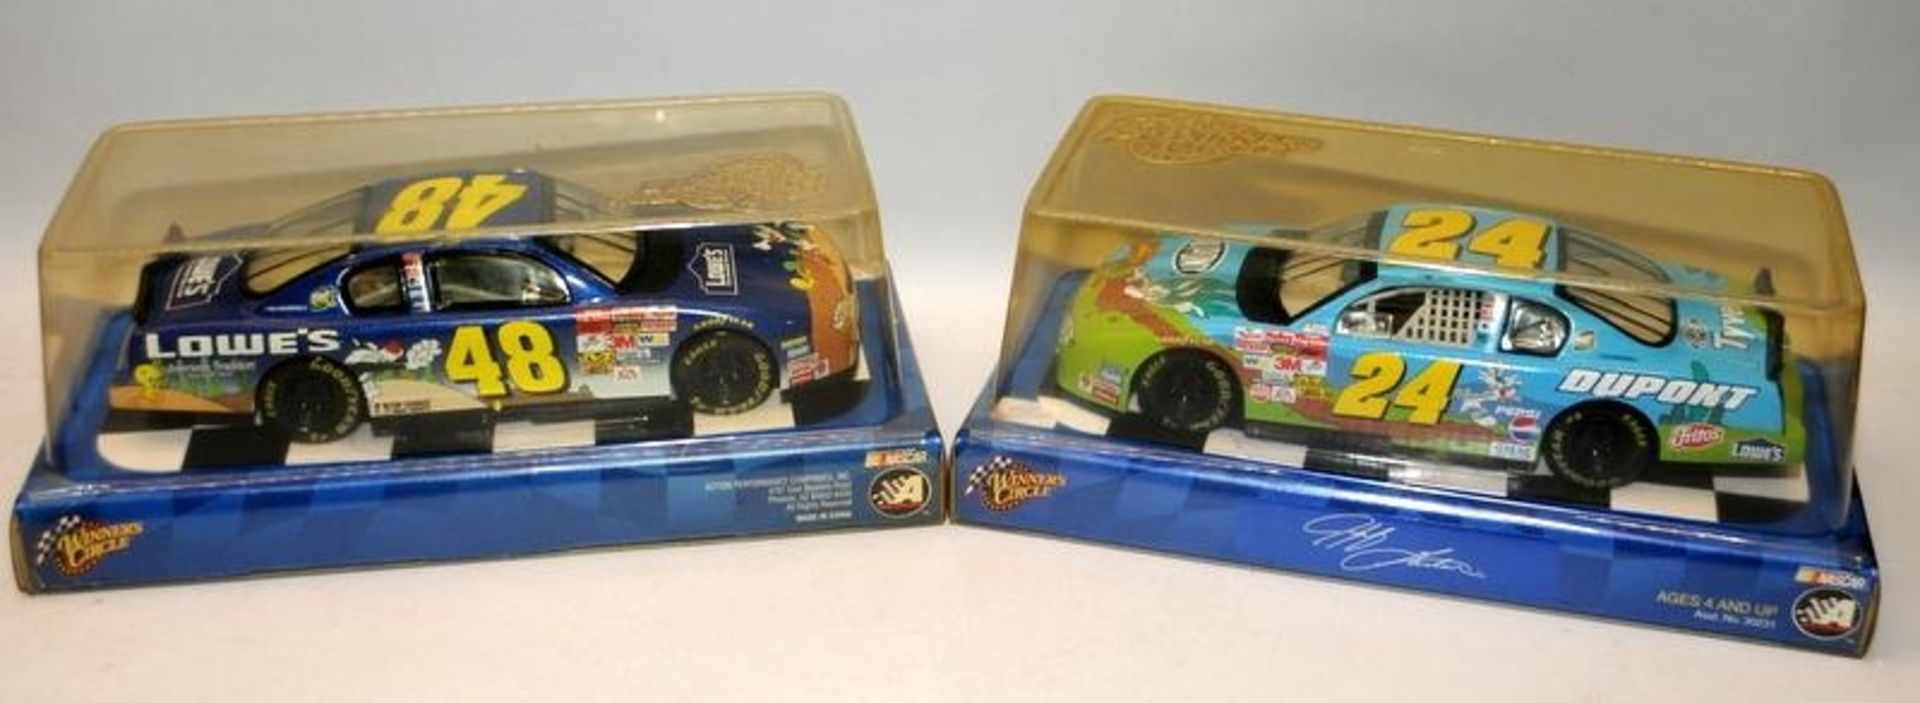 Collection of Nascar etc die-cast model racing cars c/w American Choppers series bike c/w trading - Image 2 of 4